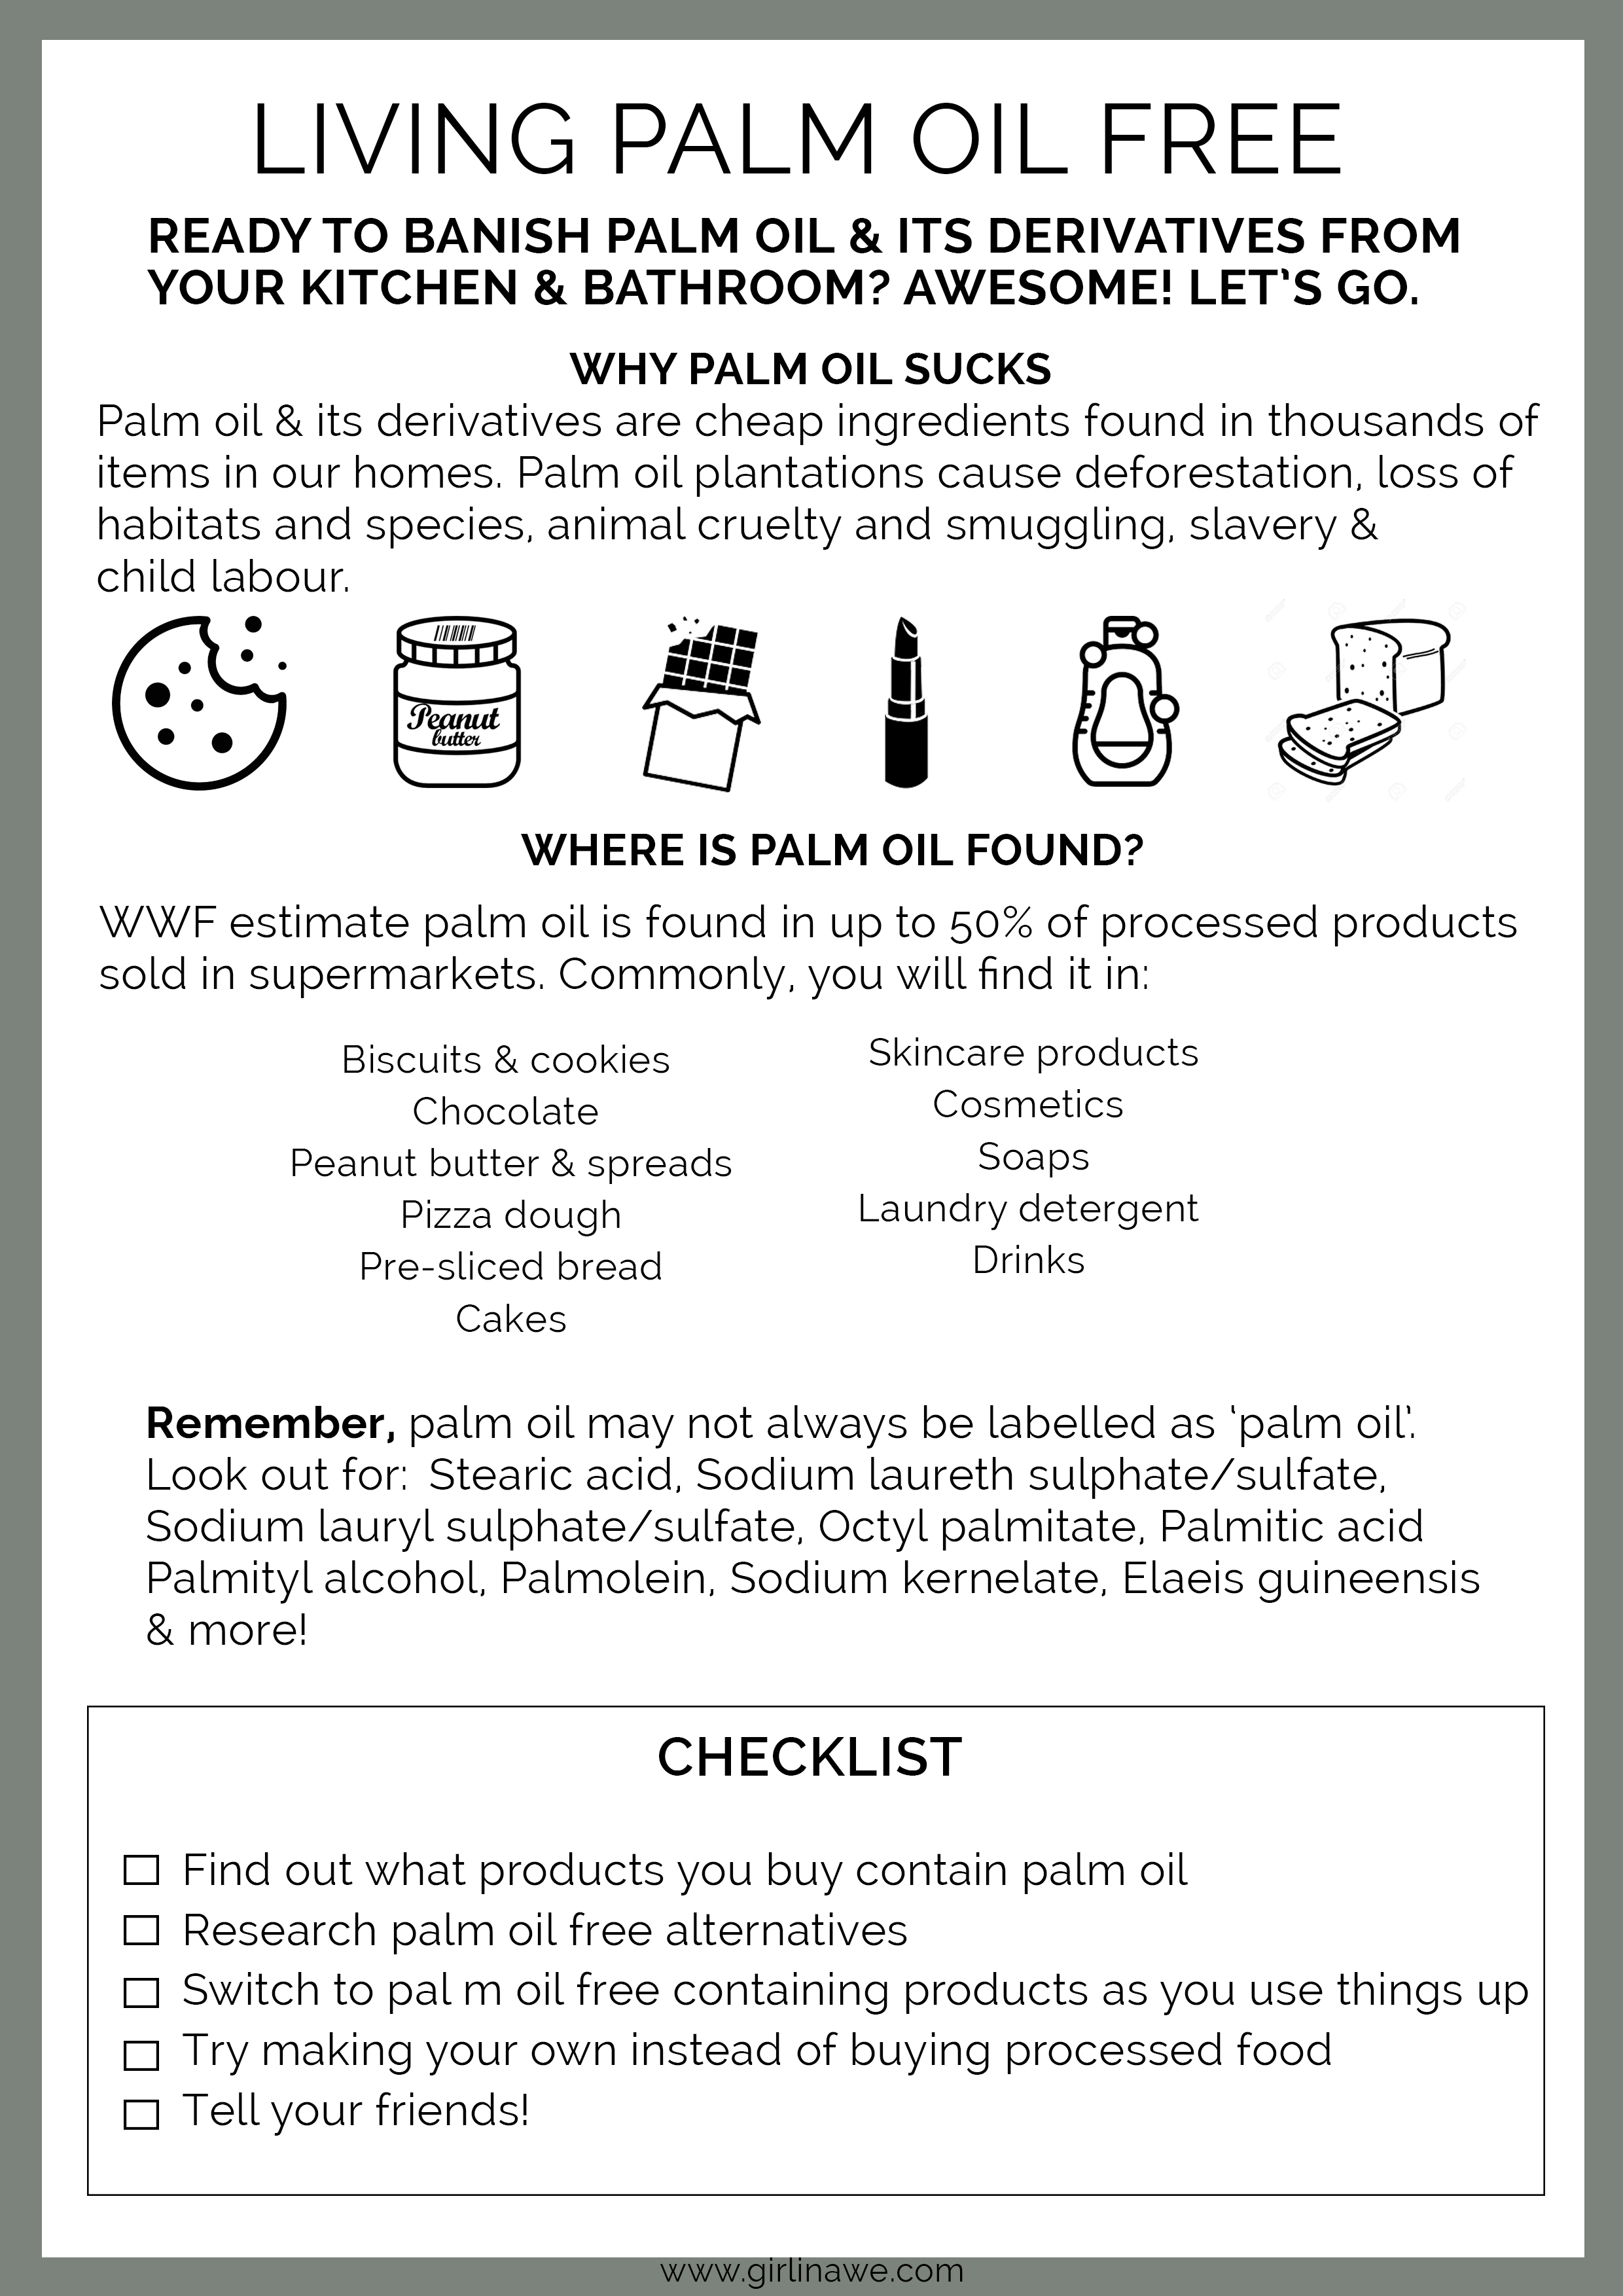 Checklist for living palm oil free